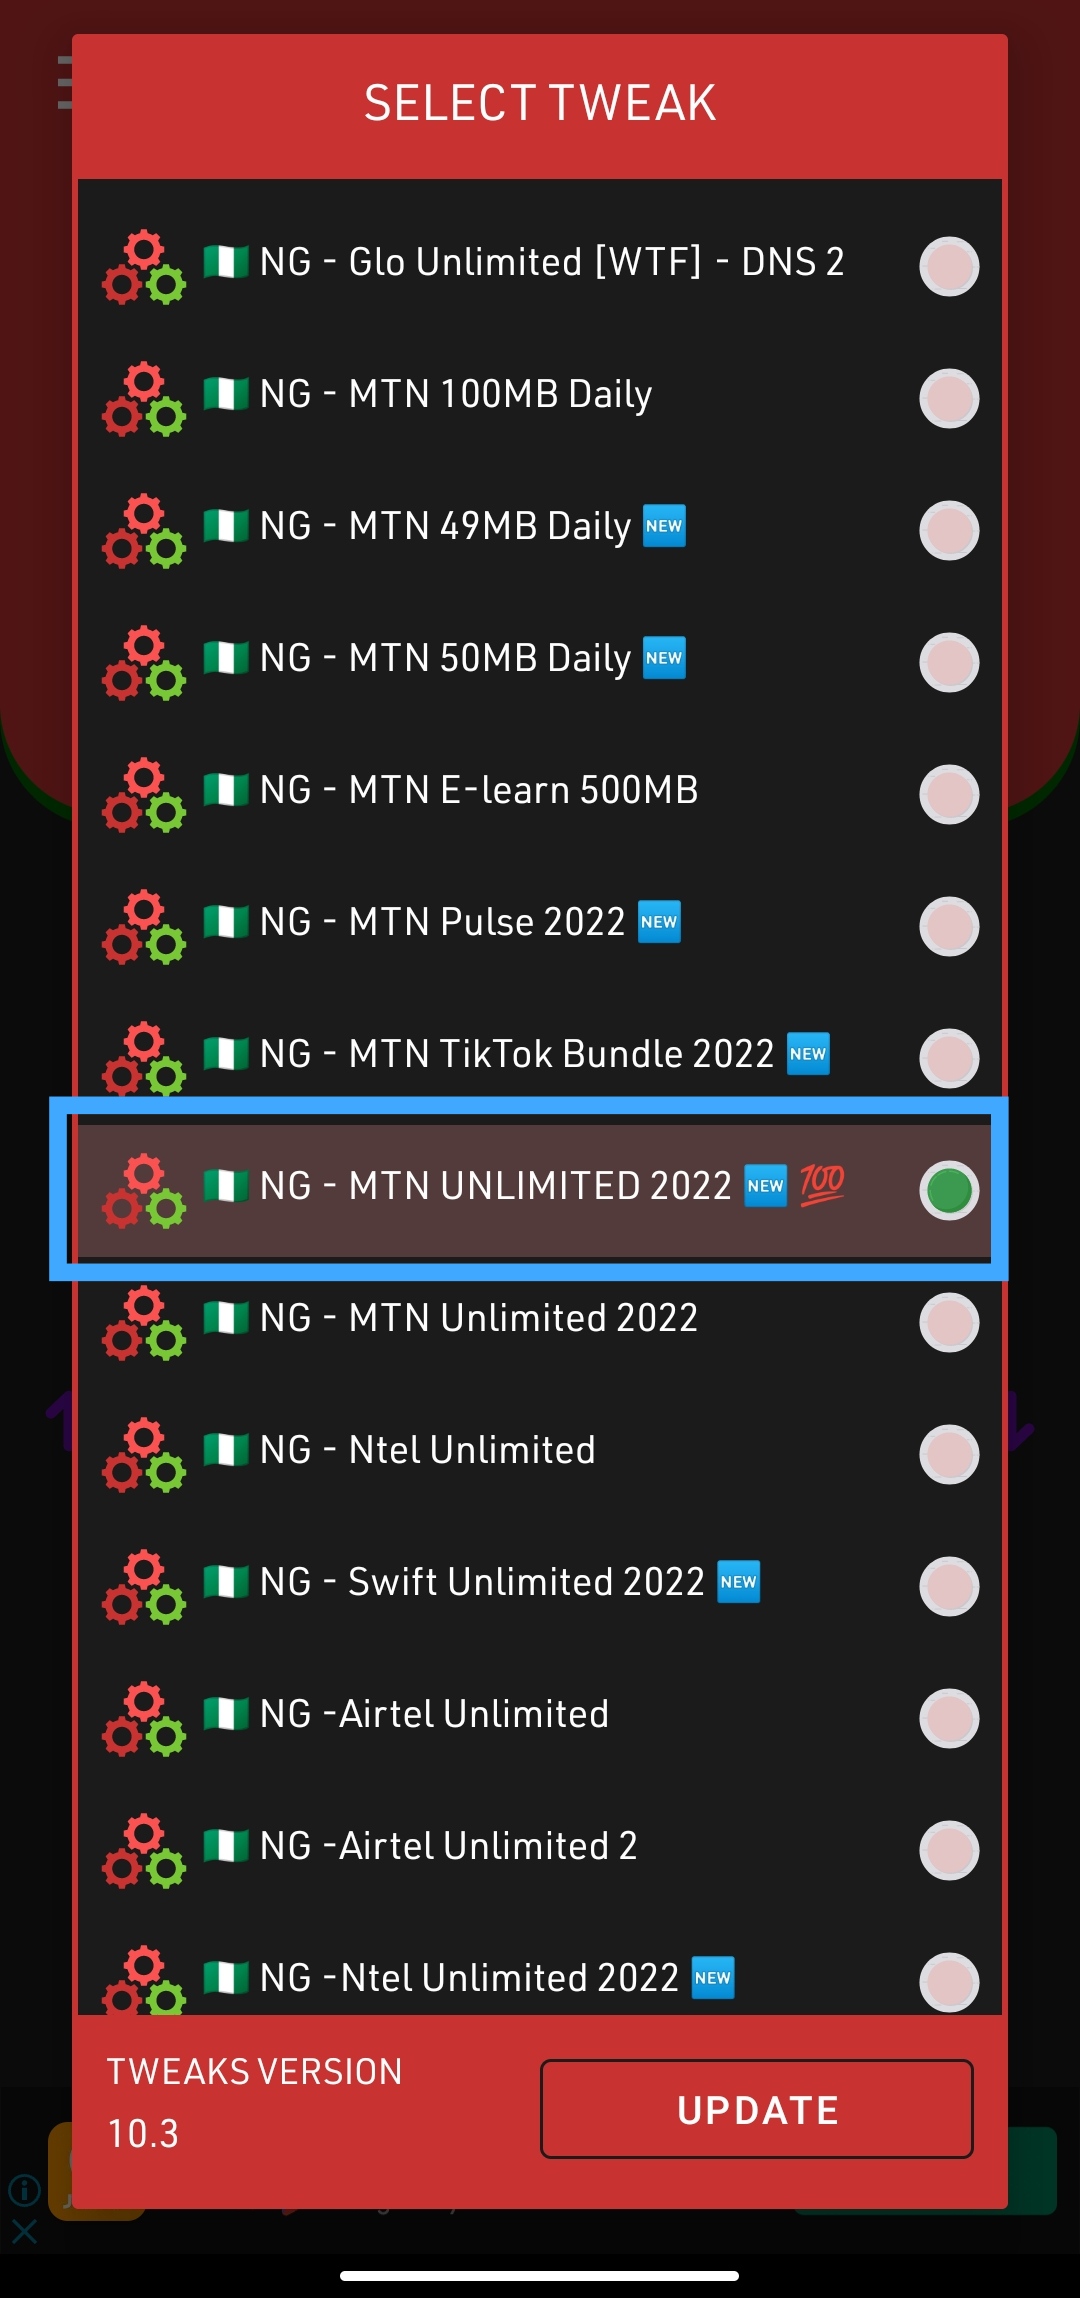 mtn unlimited free browsing with stark vpn